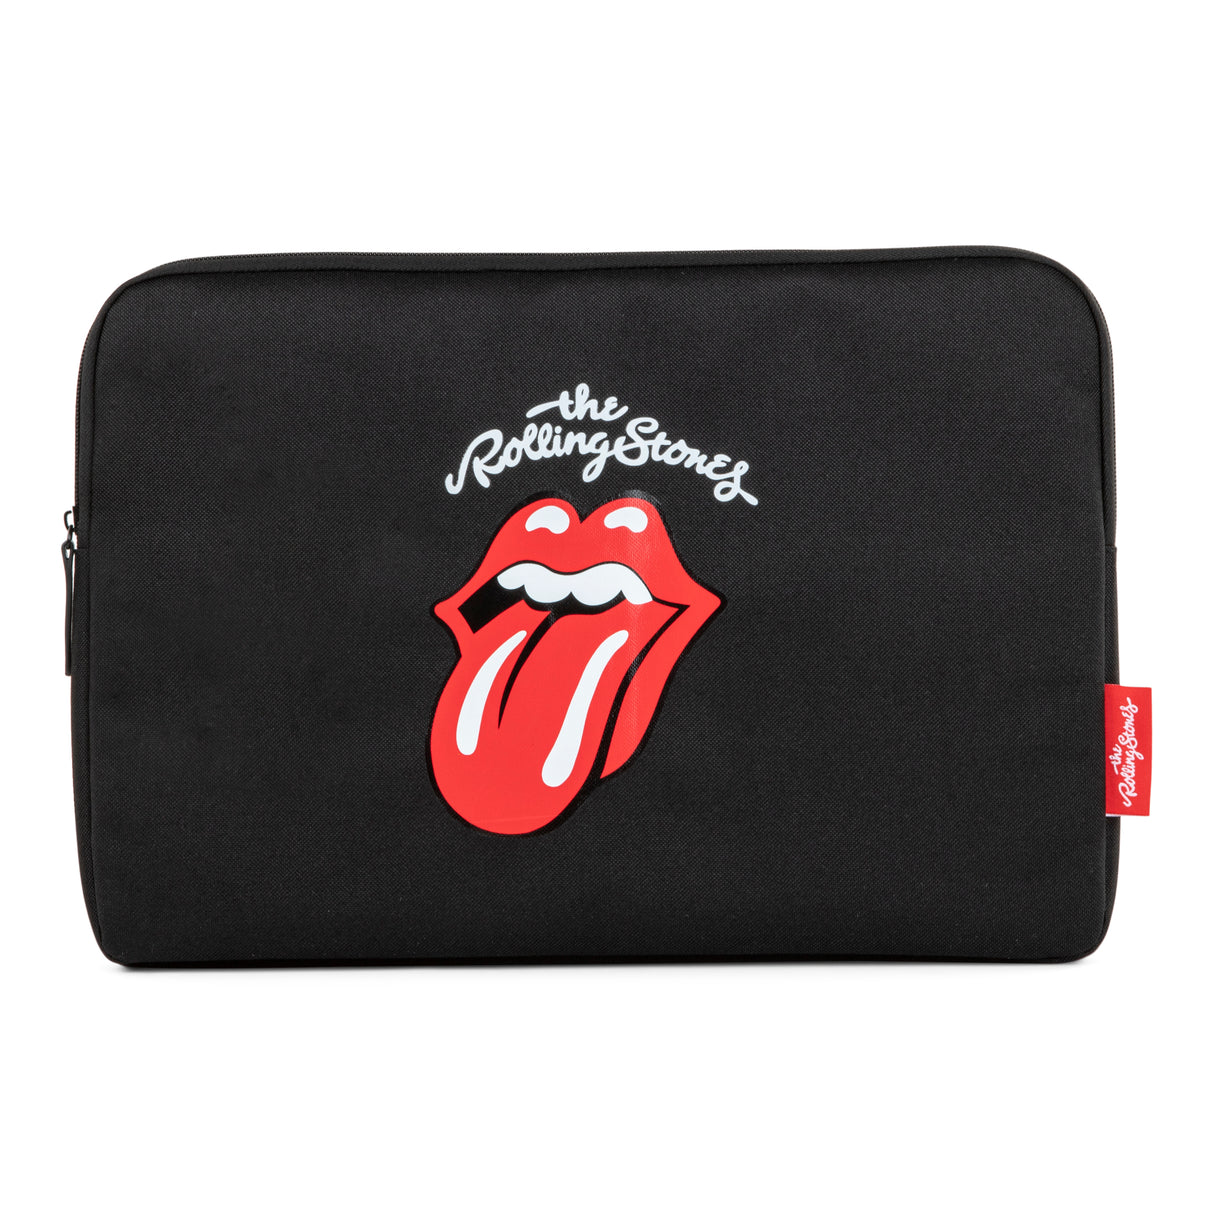 Rolling Stones - The Core - Laptop sleeve